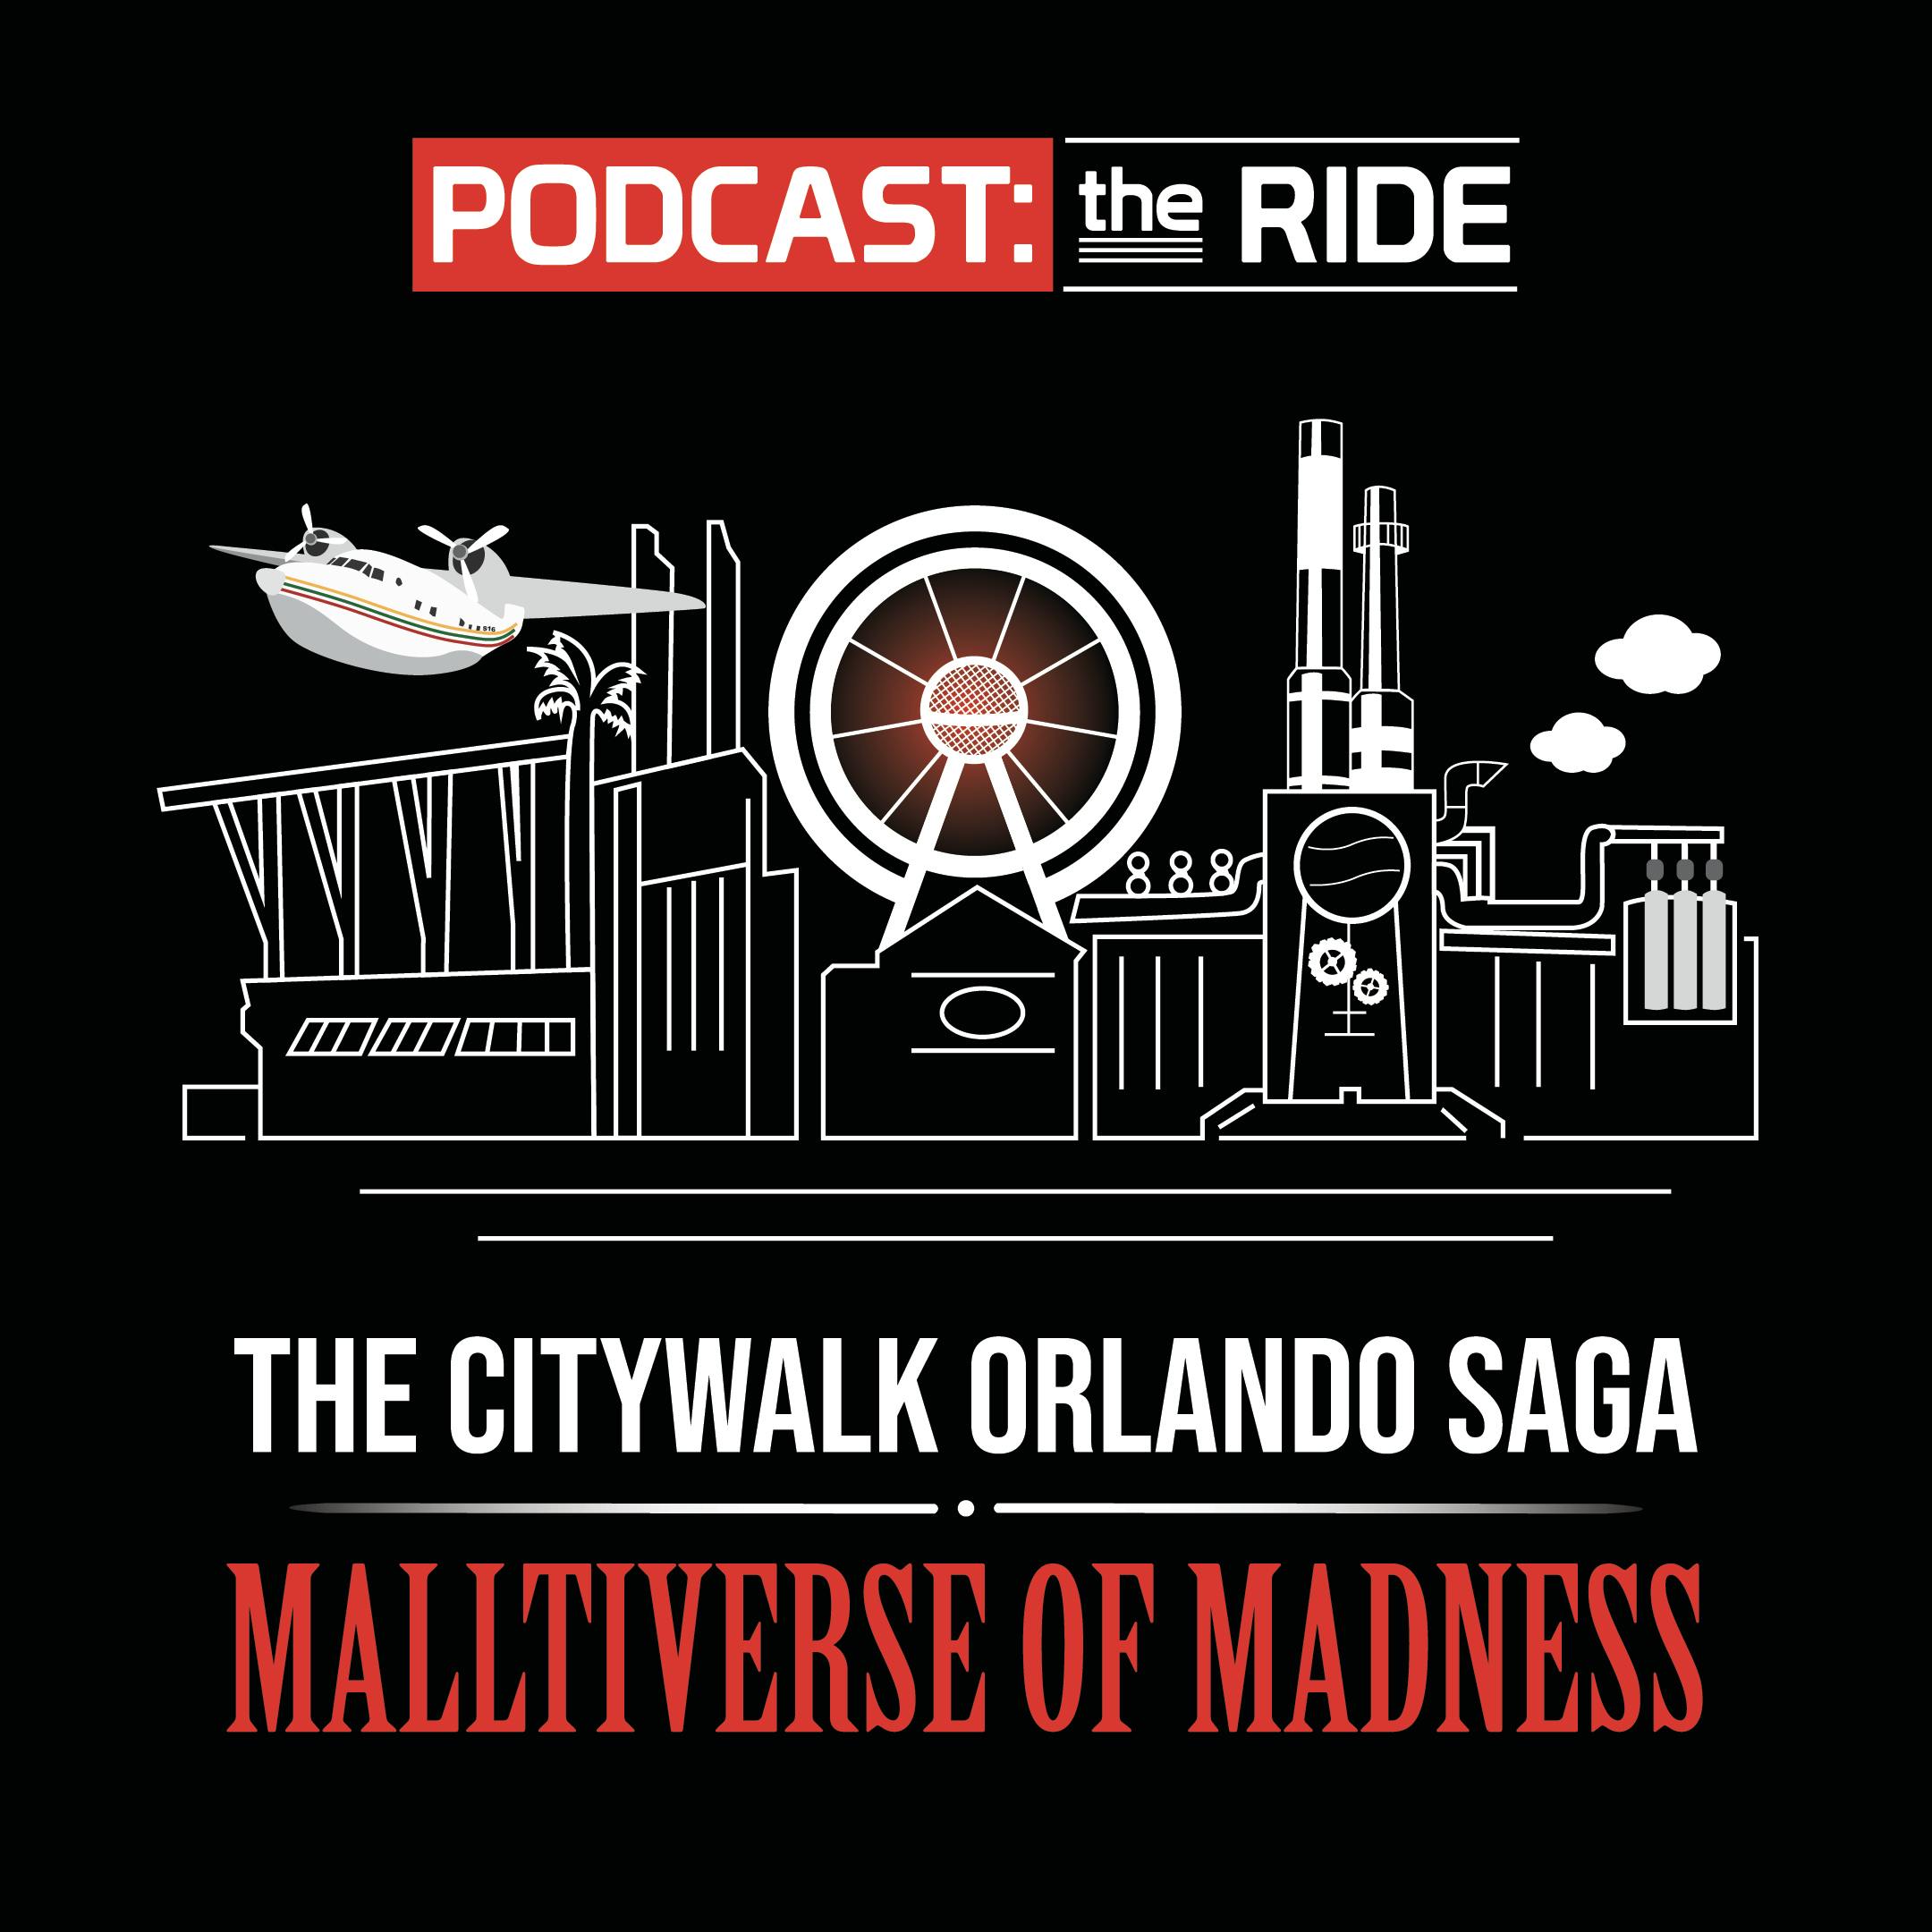 The CityWalk Orlando Saga: Malltiverse of Madness 2 - 1 with The Level Keeper (Live in Orlando)